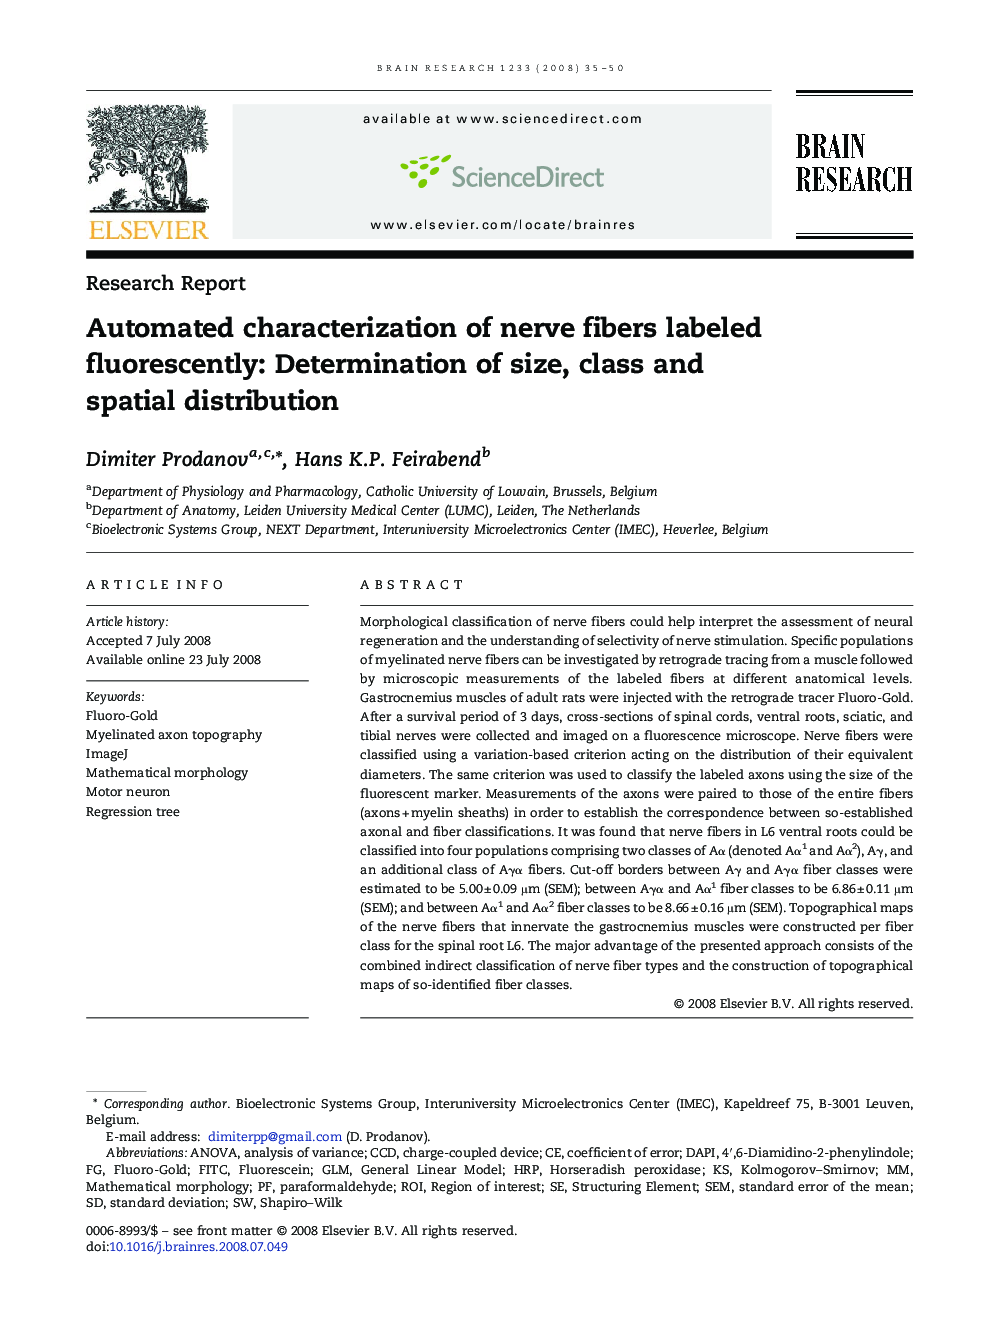 Automated characterization of nerve fibers labeled fluorescently: Determination of size, class and spatial distribution